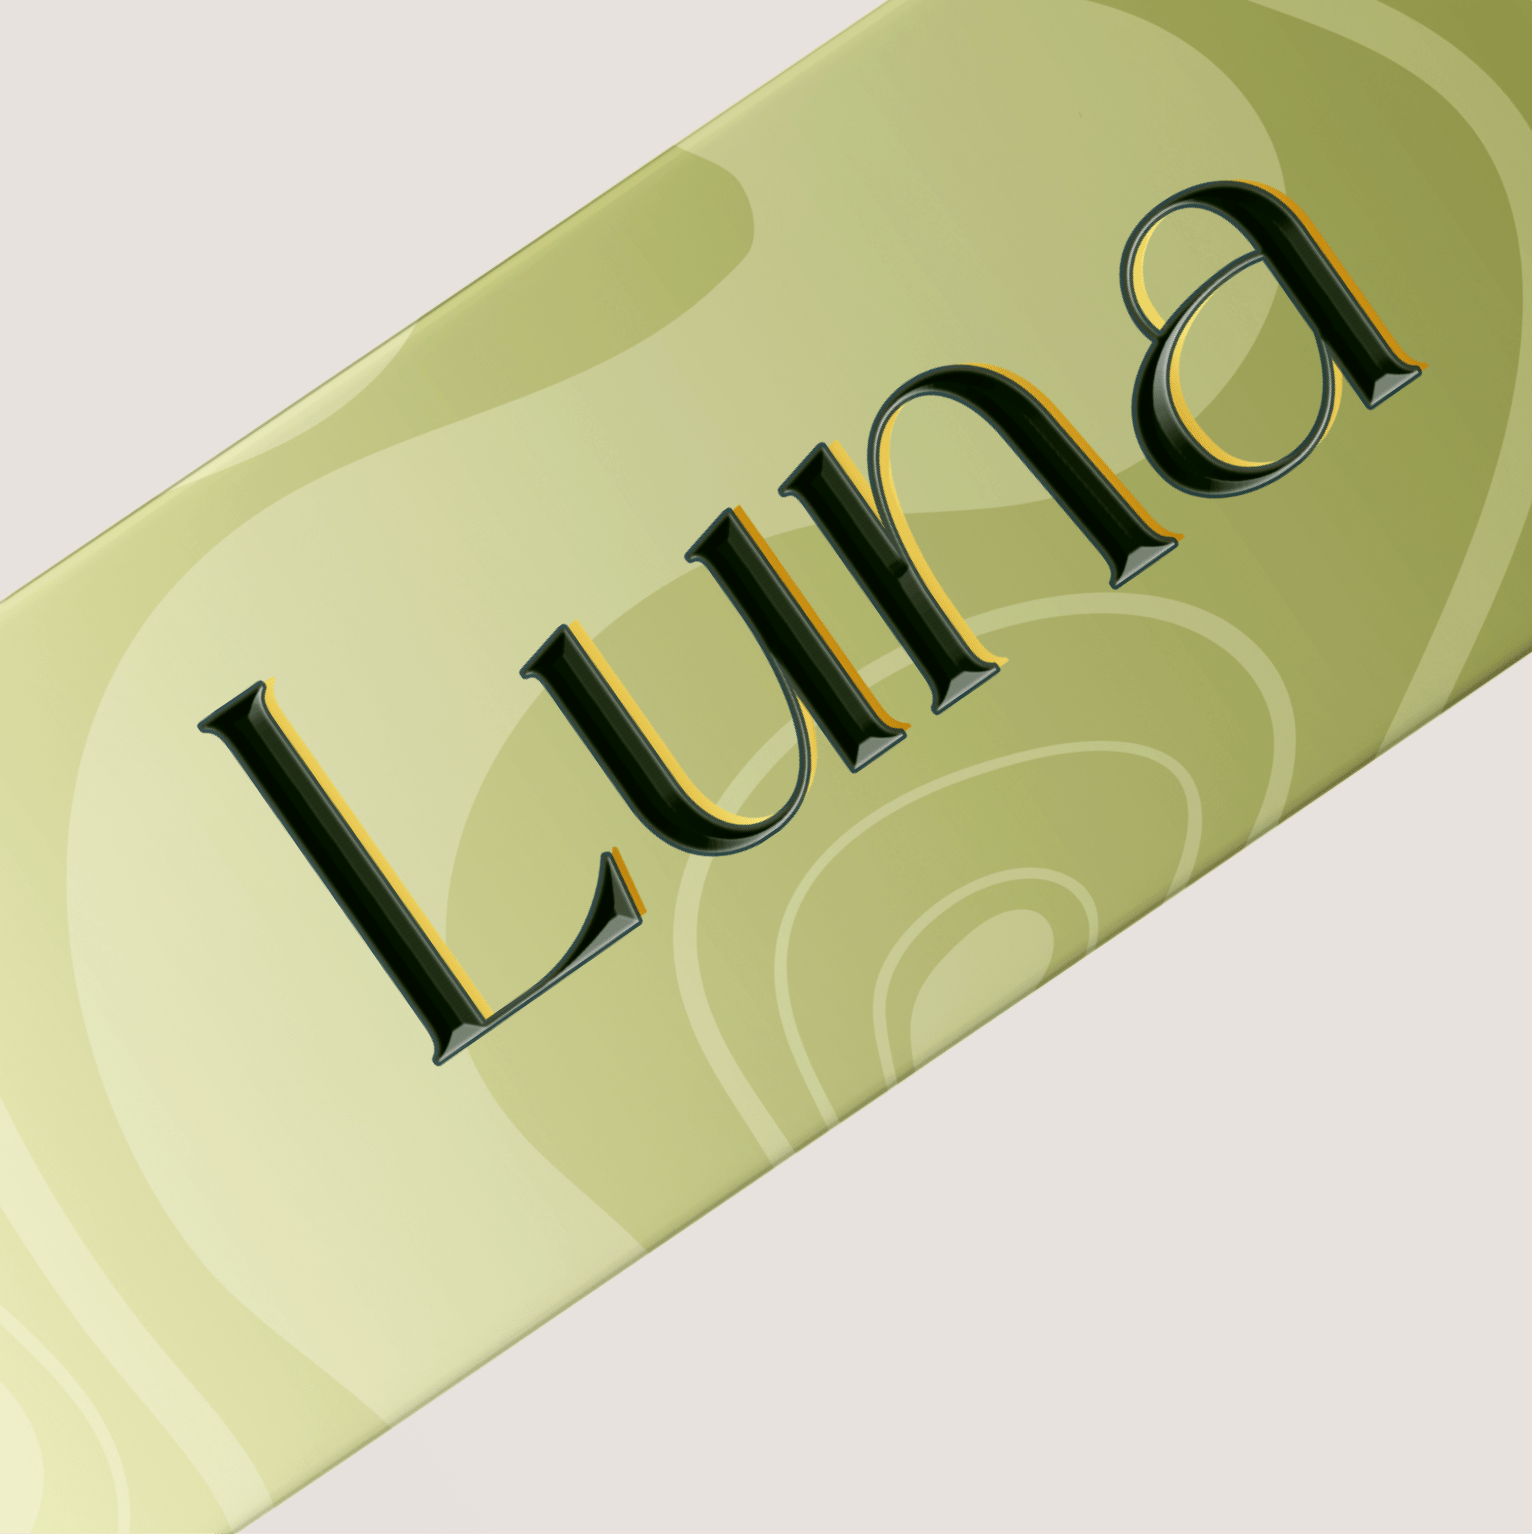 packaging box made of green cardboar, with brand name "Luna"